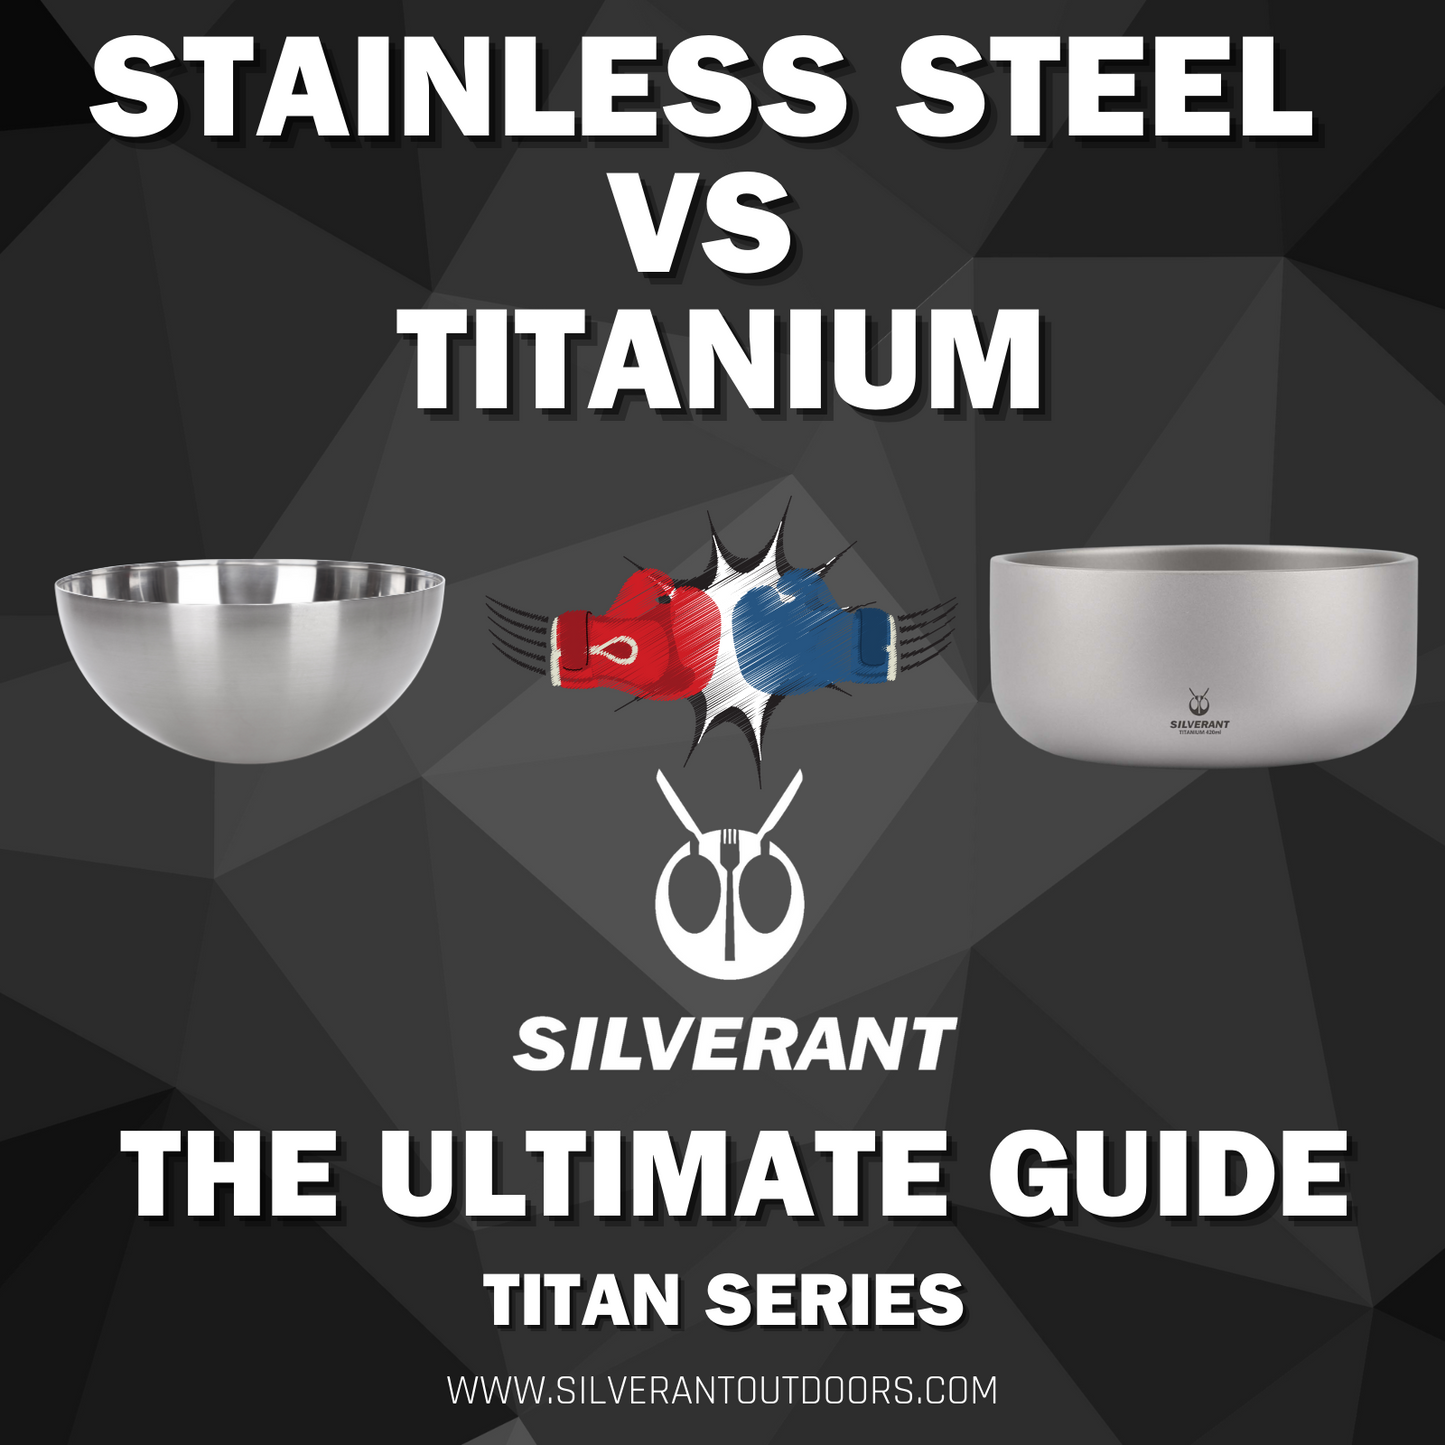 Why You Should Buy A Titanium Cup?